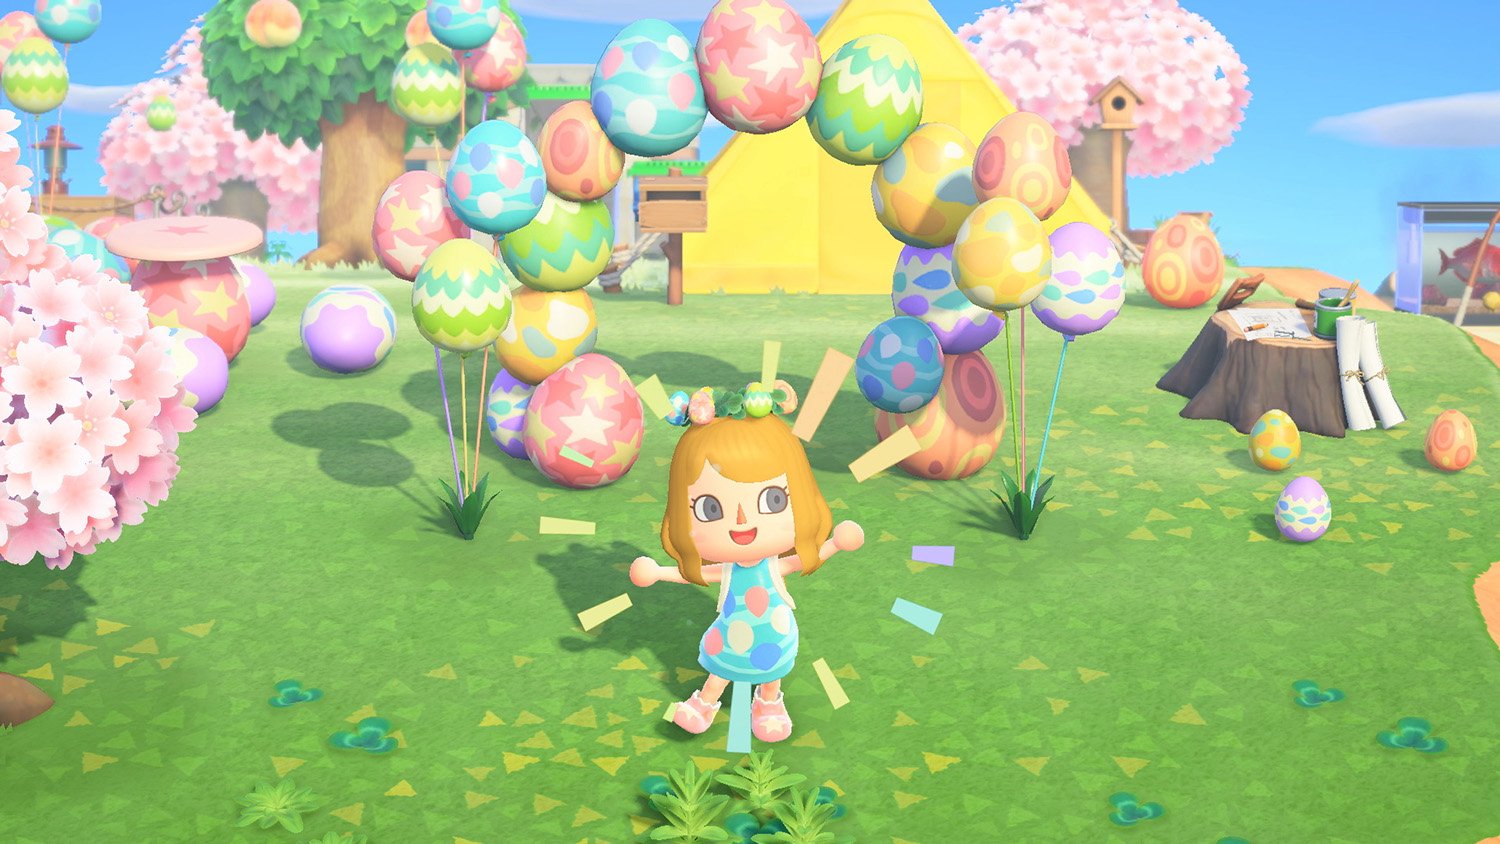 The Bunny Day event in April in Animal Crossing: New Horizons